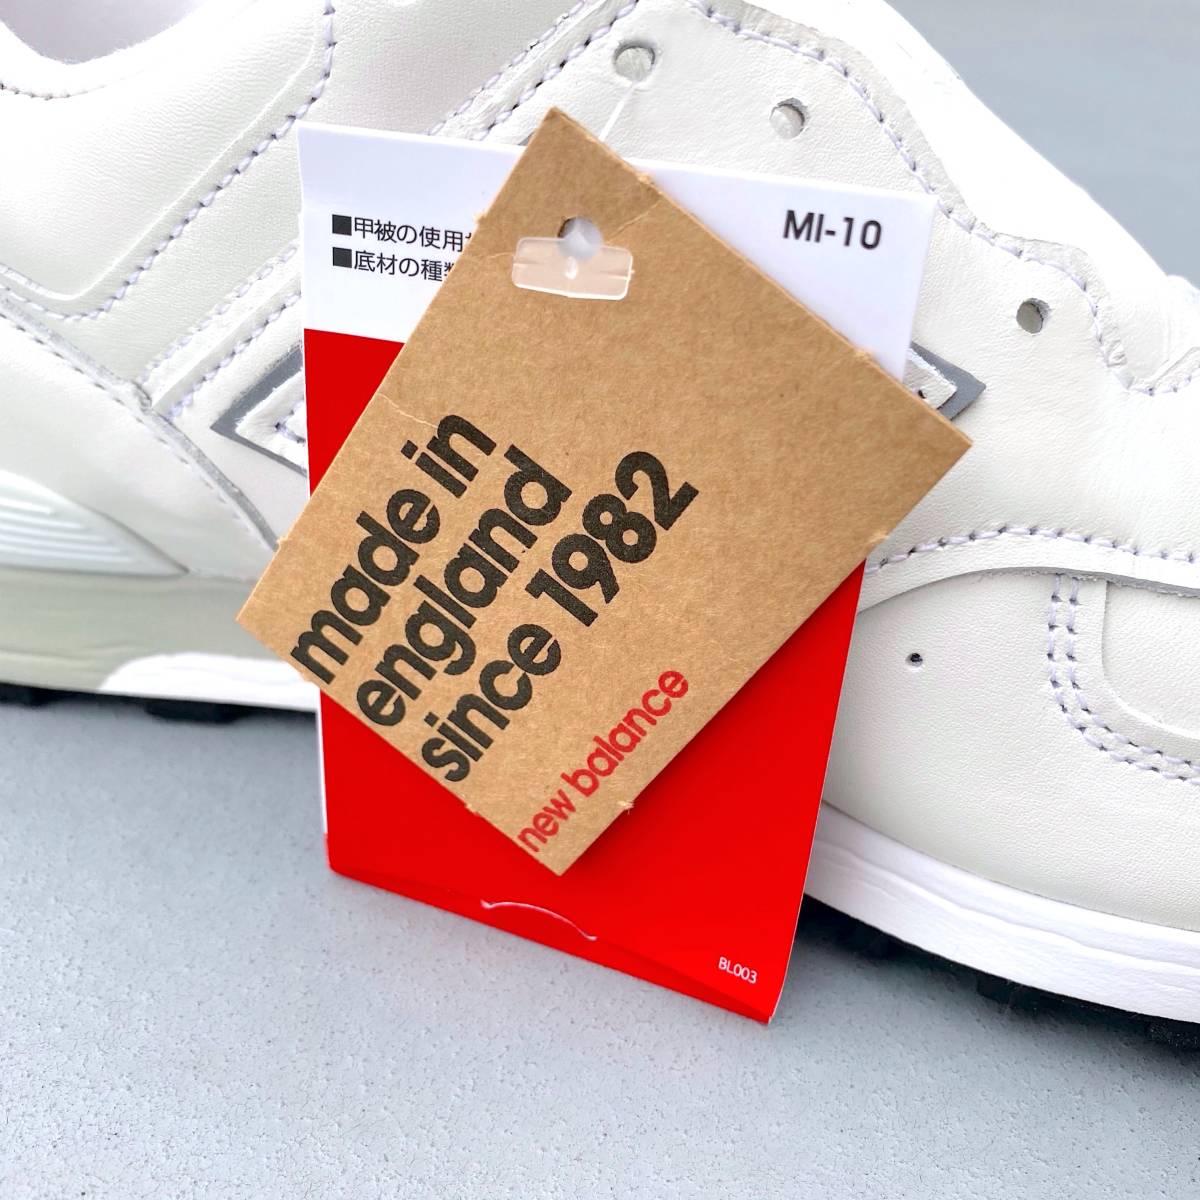  domestic regular goods UK made all leather NEW BALANCE M576WWL white × gray US10 28cm limitation England Britain made NB white sneakers MADE IN ENGLAND